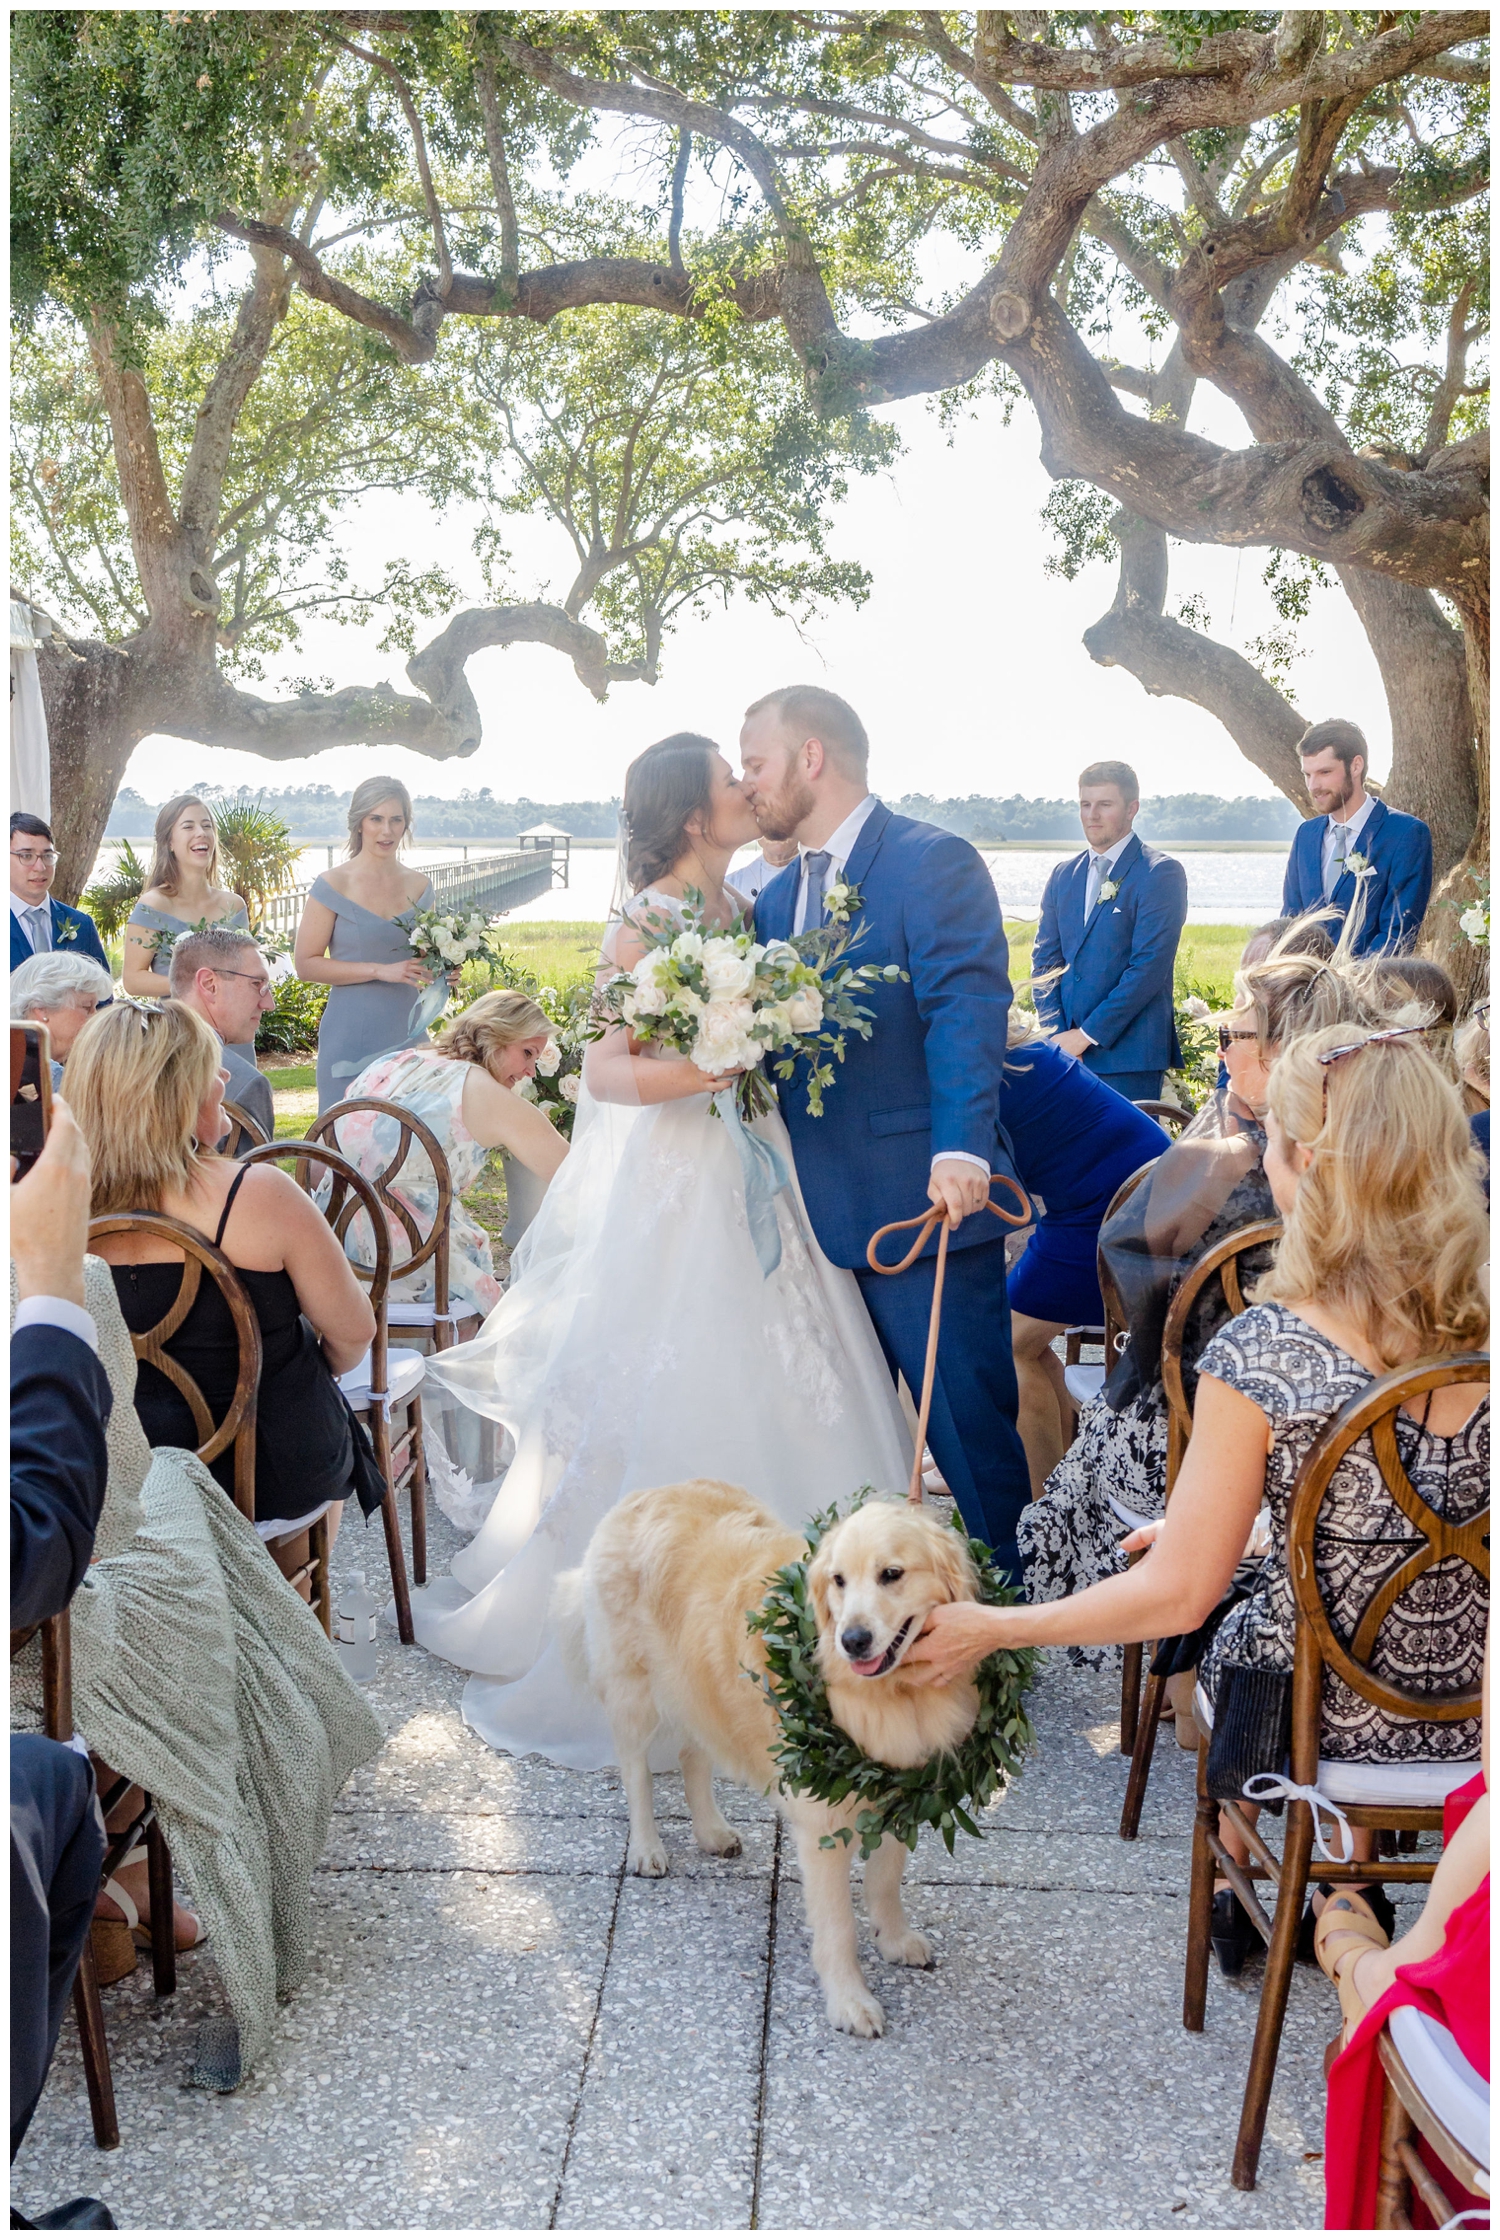 newlywed exit ceremony with dog